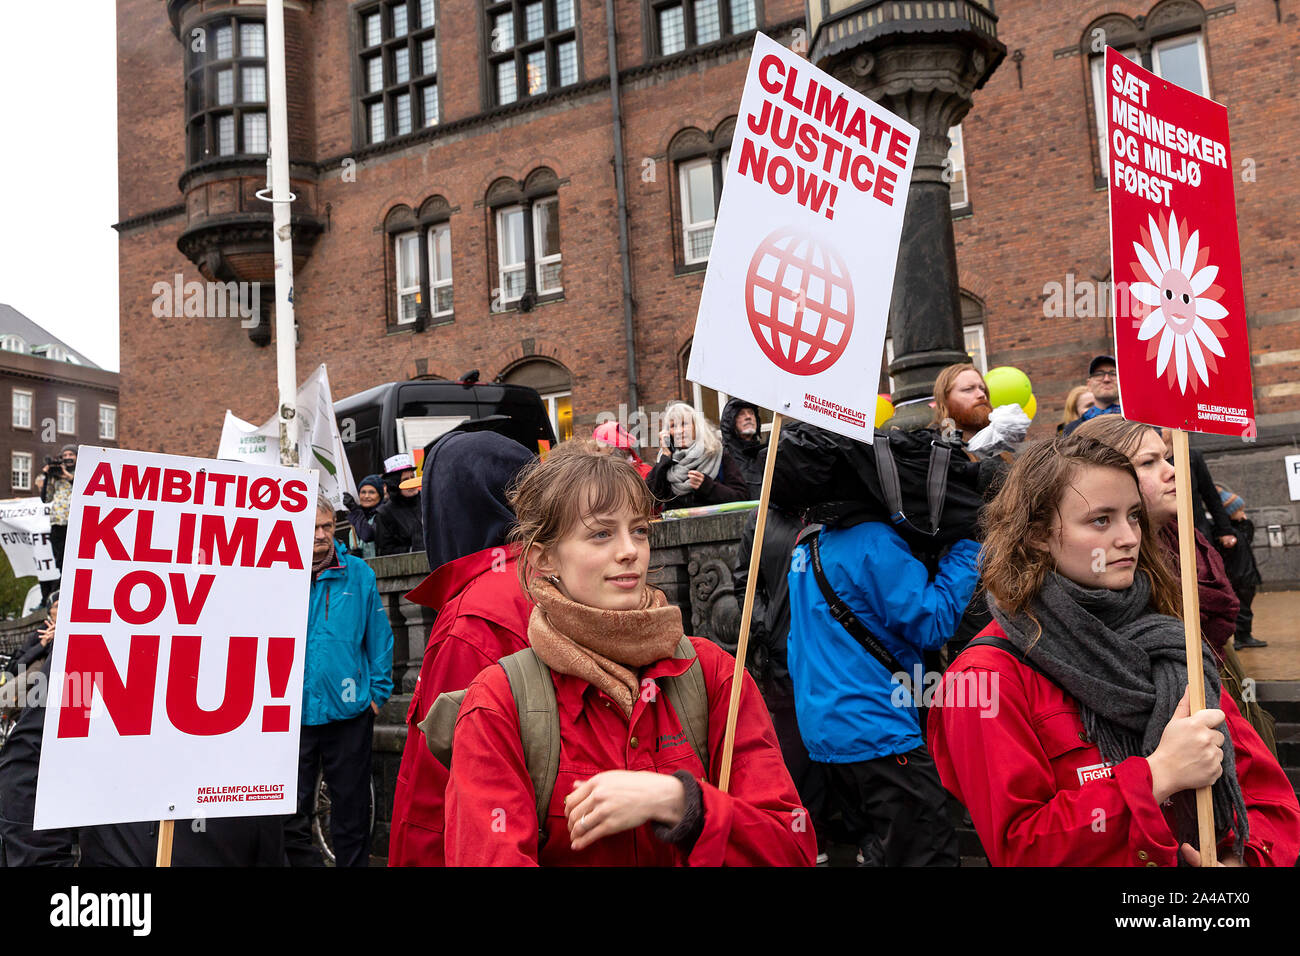 COPENHAGEN, DENMARK – OCTOBER 11, 2019:  Thousands of people gather at a People’s Climate March at Copenhagen City Hall Square and demanded swift and extensive climate action, which marks the conclusion of the C40 World Mayors Summit during this week in Copenhagen.  To the left a sign with the text in English: ‘Ambitious climate law now’. This refers to a popular demand for a statutory framework condition for the Danish Governments climate efforts, which includes obligations to define binding climate goals. Stock Photo